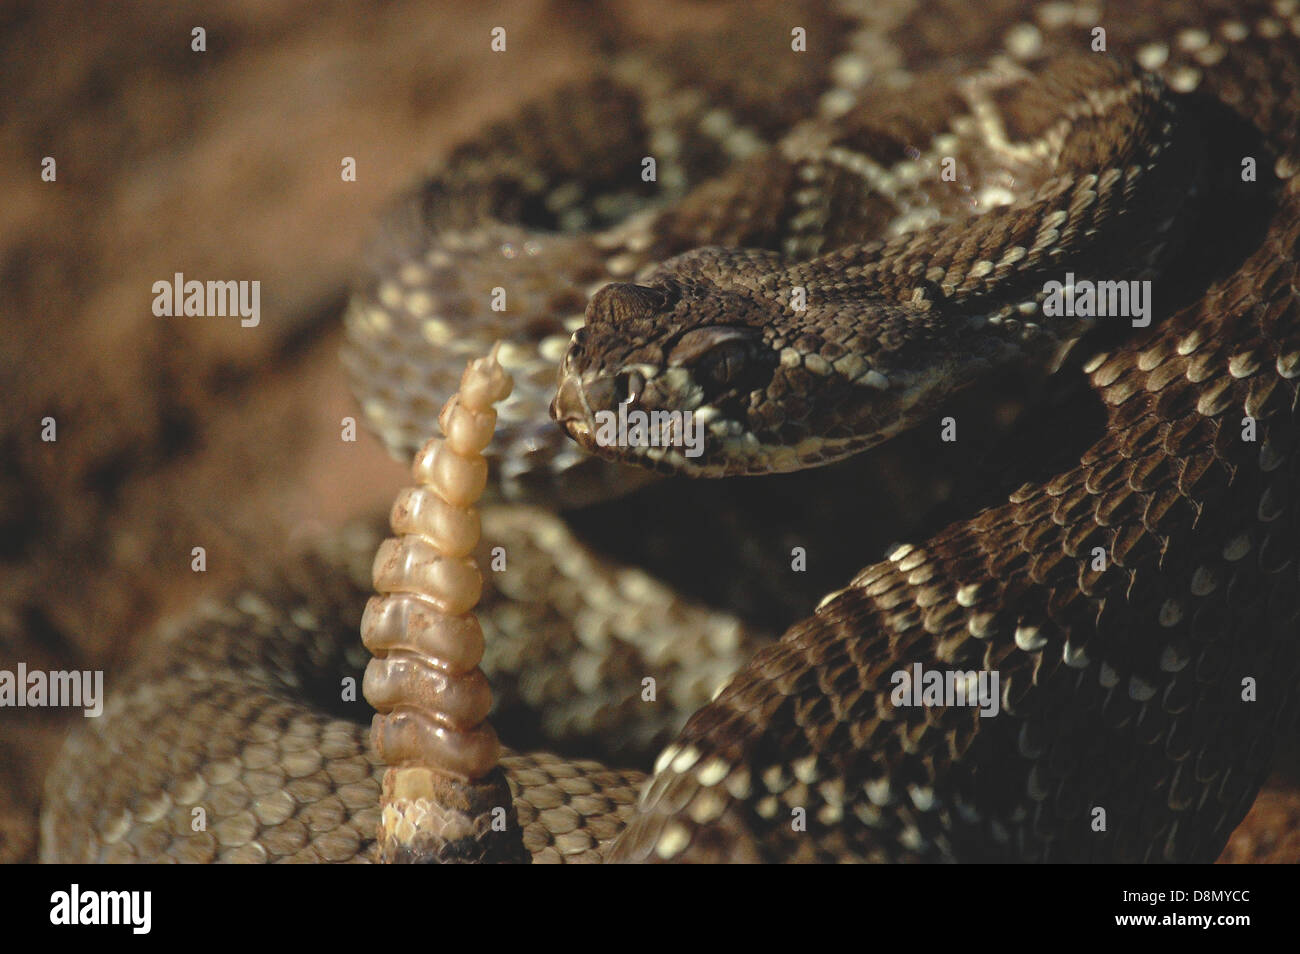 Close-up of an angry Mojave green rattlesnake. Stock Photo